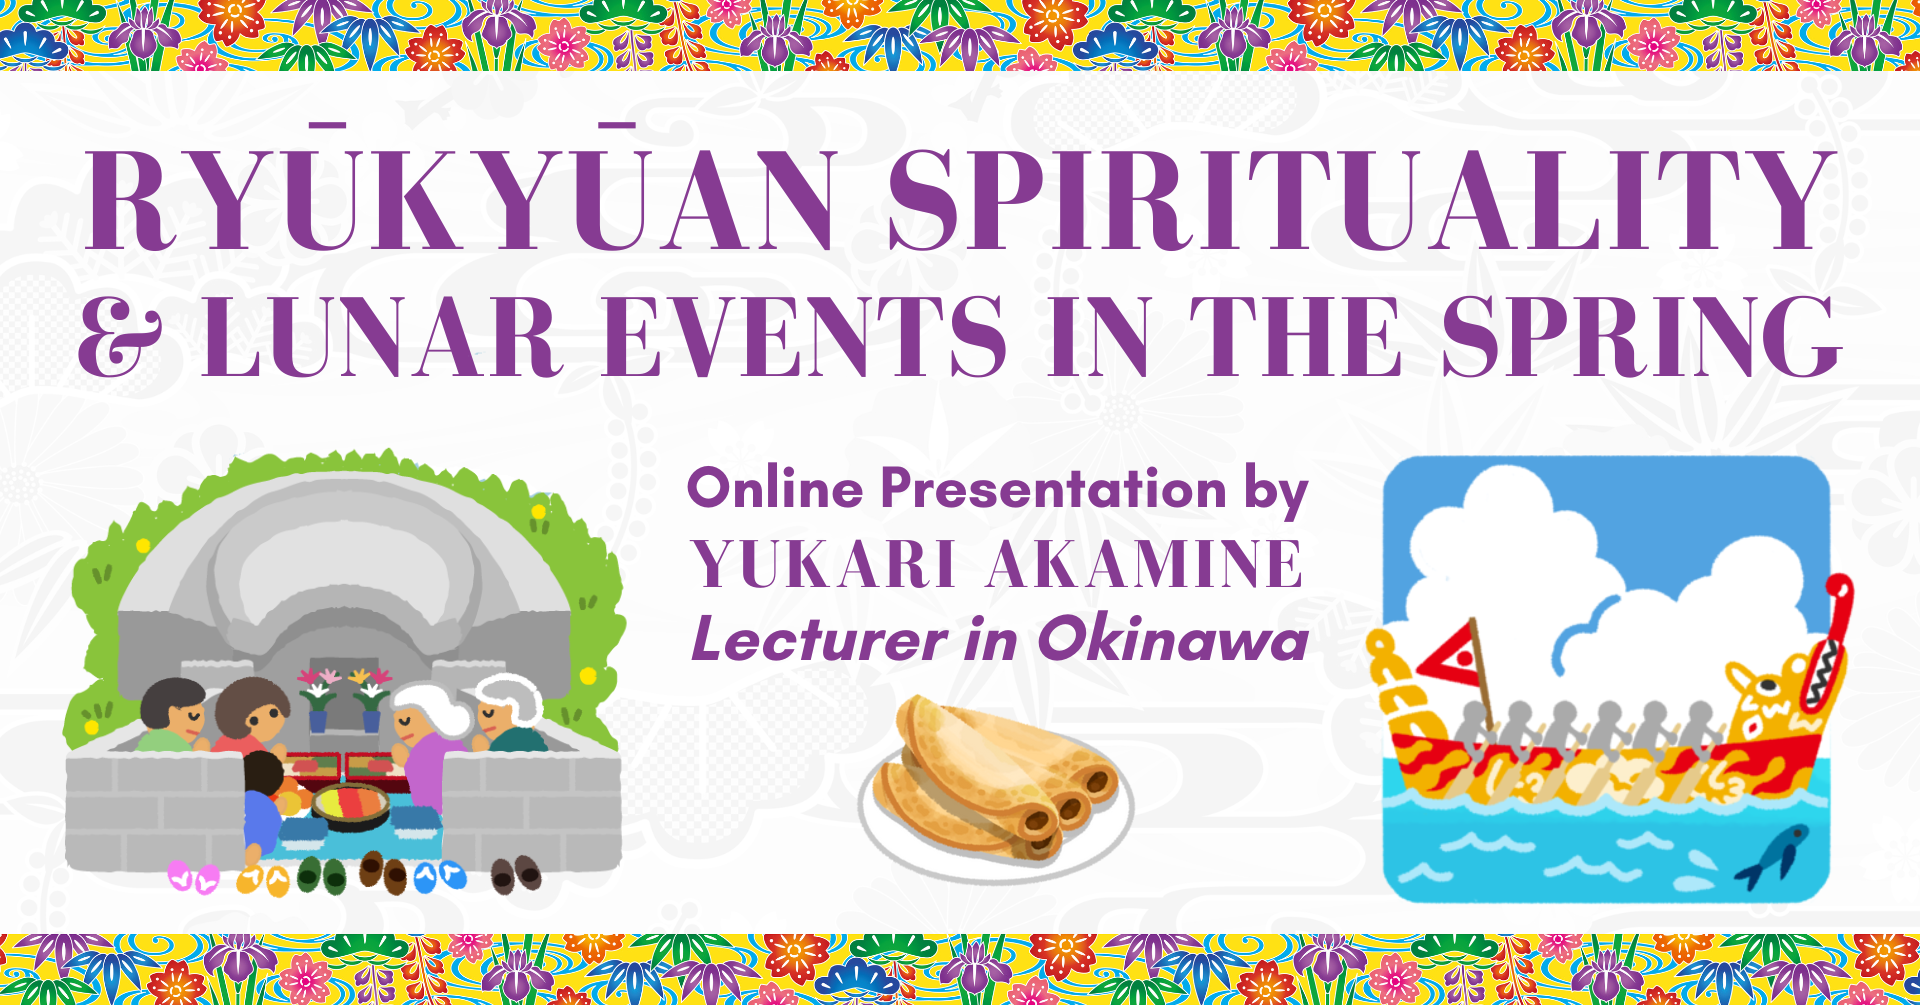 Ryukyuan Spirituality & Lunar Events in the Spring